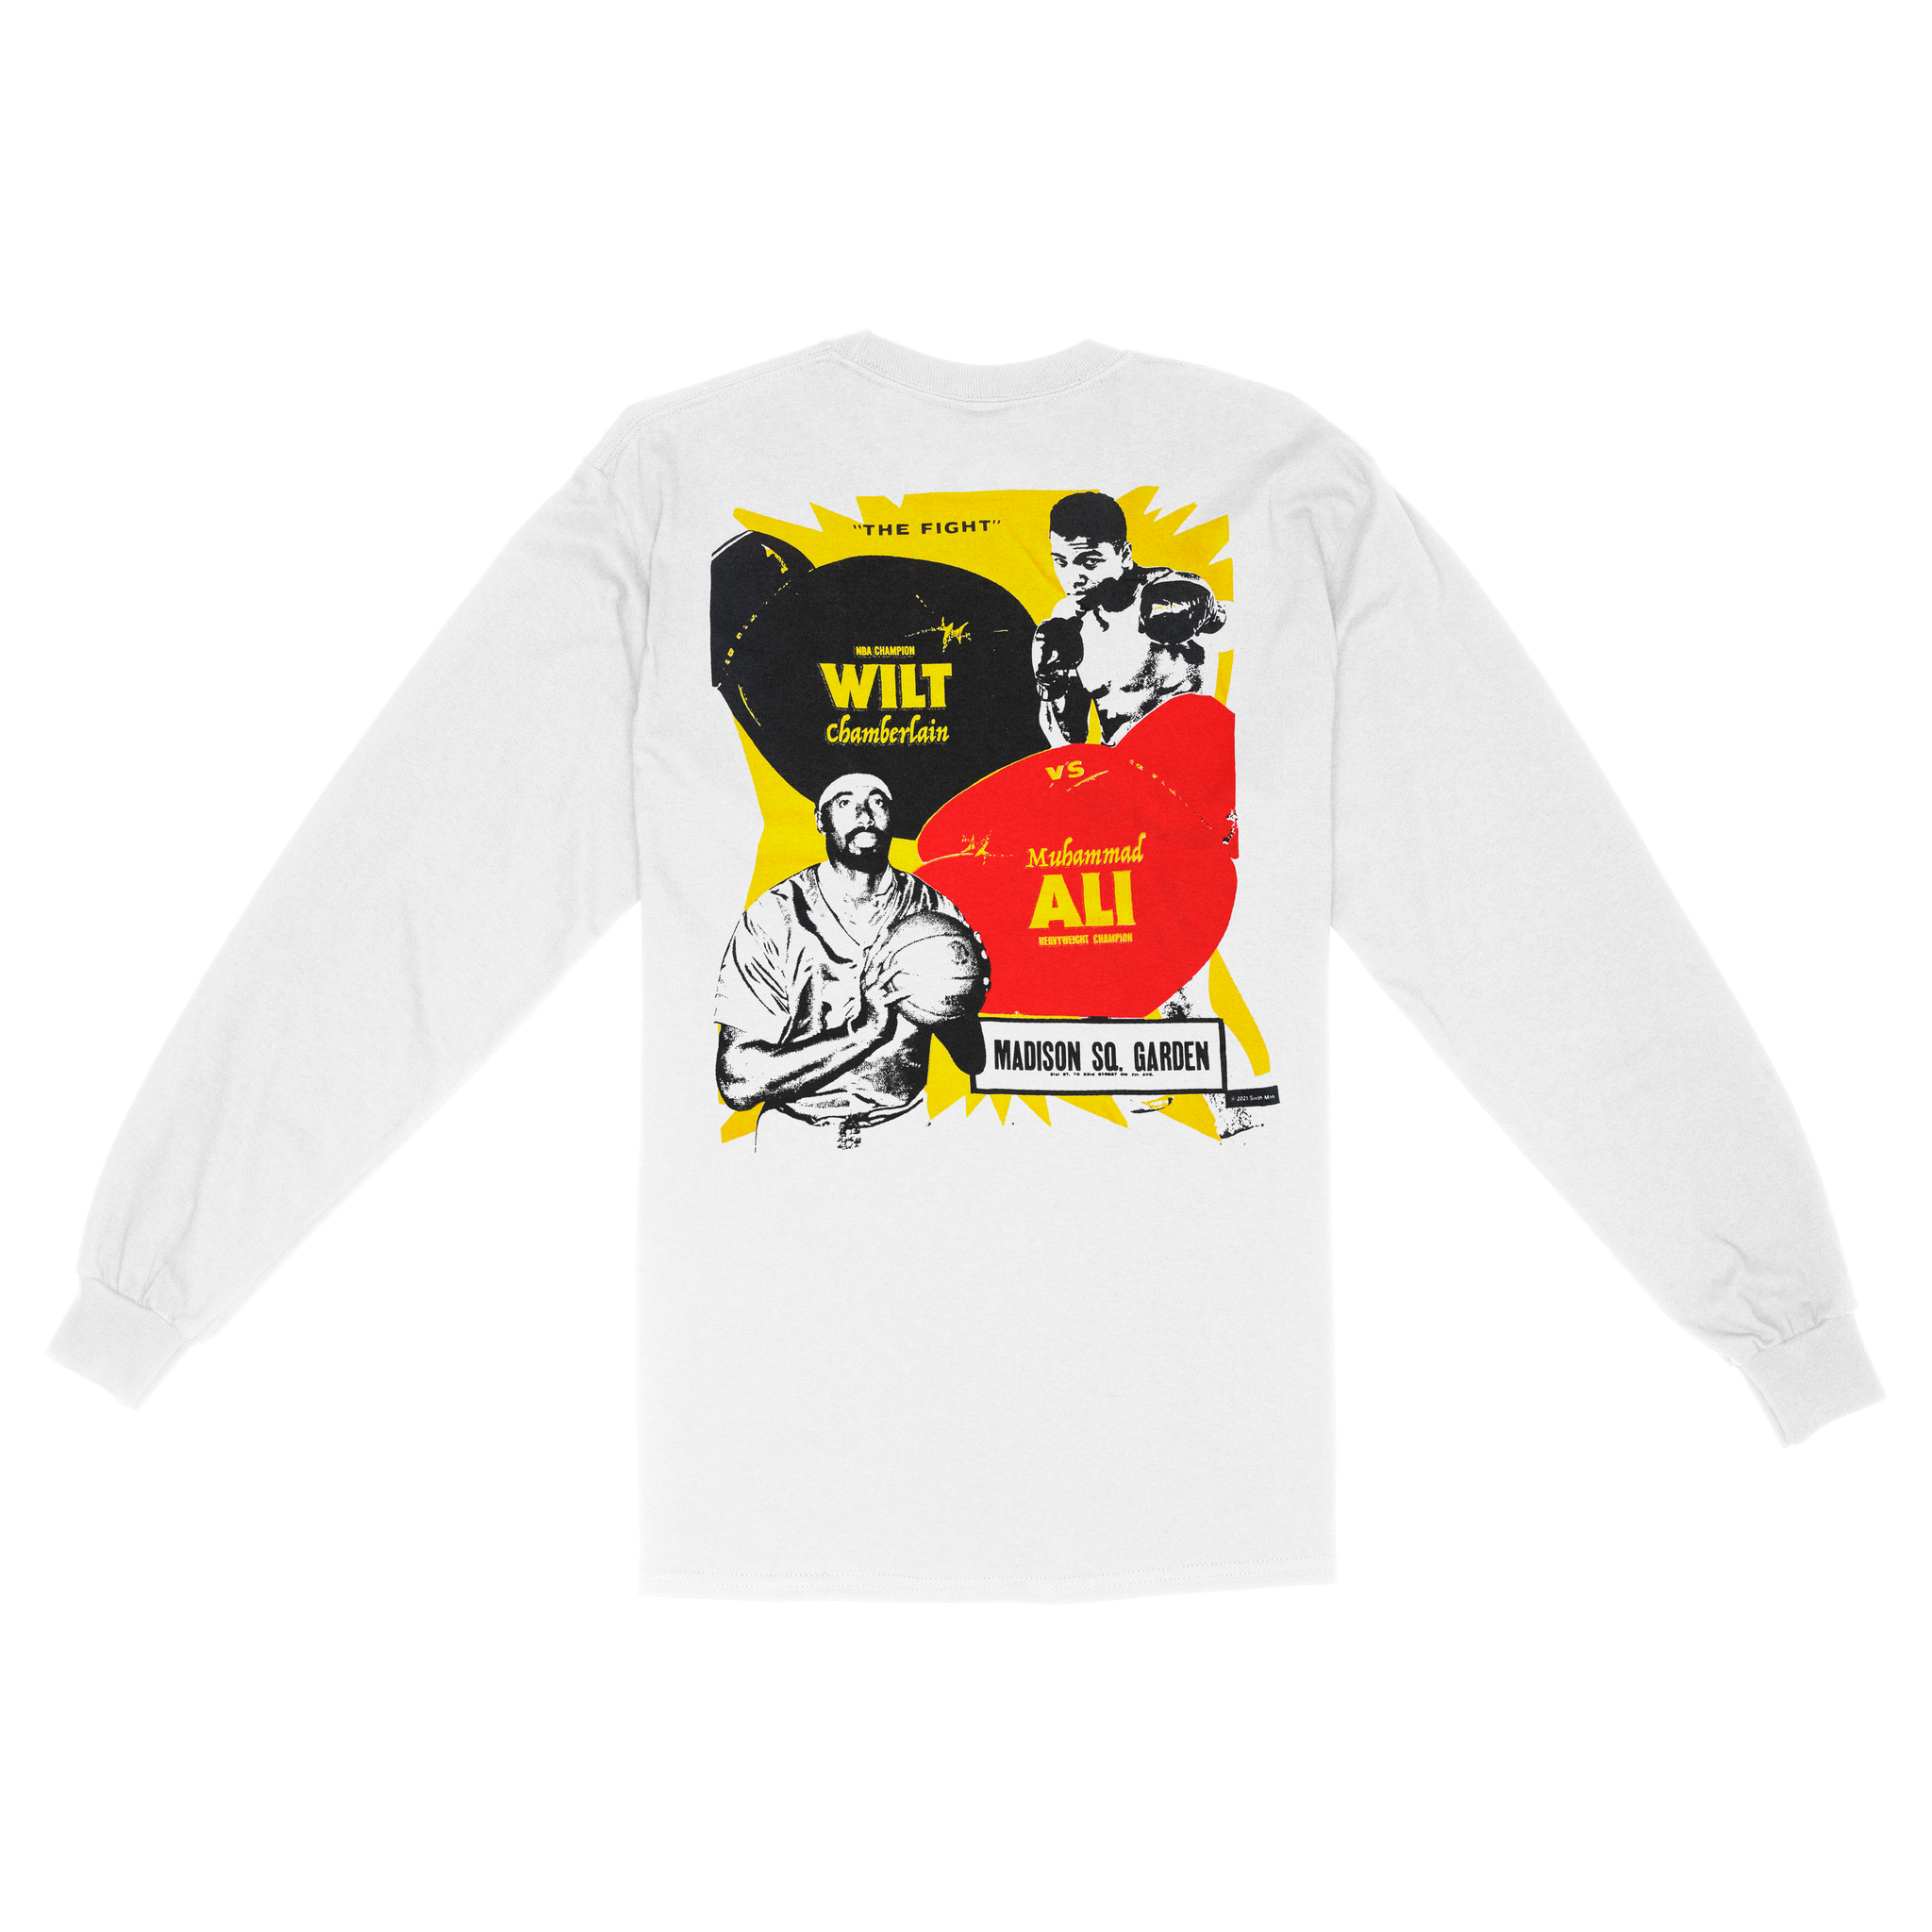 White long sleeve shirt with a black and white image of Muhammad Ali and Wilt Chamberlain. In yellow text it says "NBA Champion Wilt Chamberlain" and "Muhammad Ali Heavyweight Champion" 